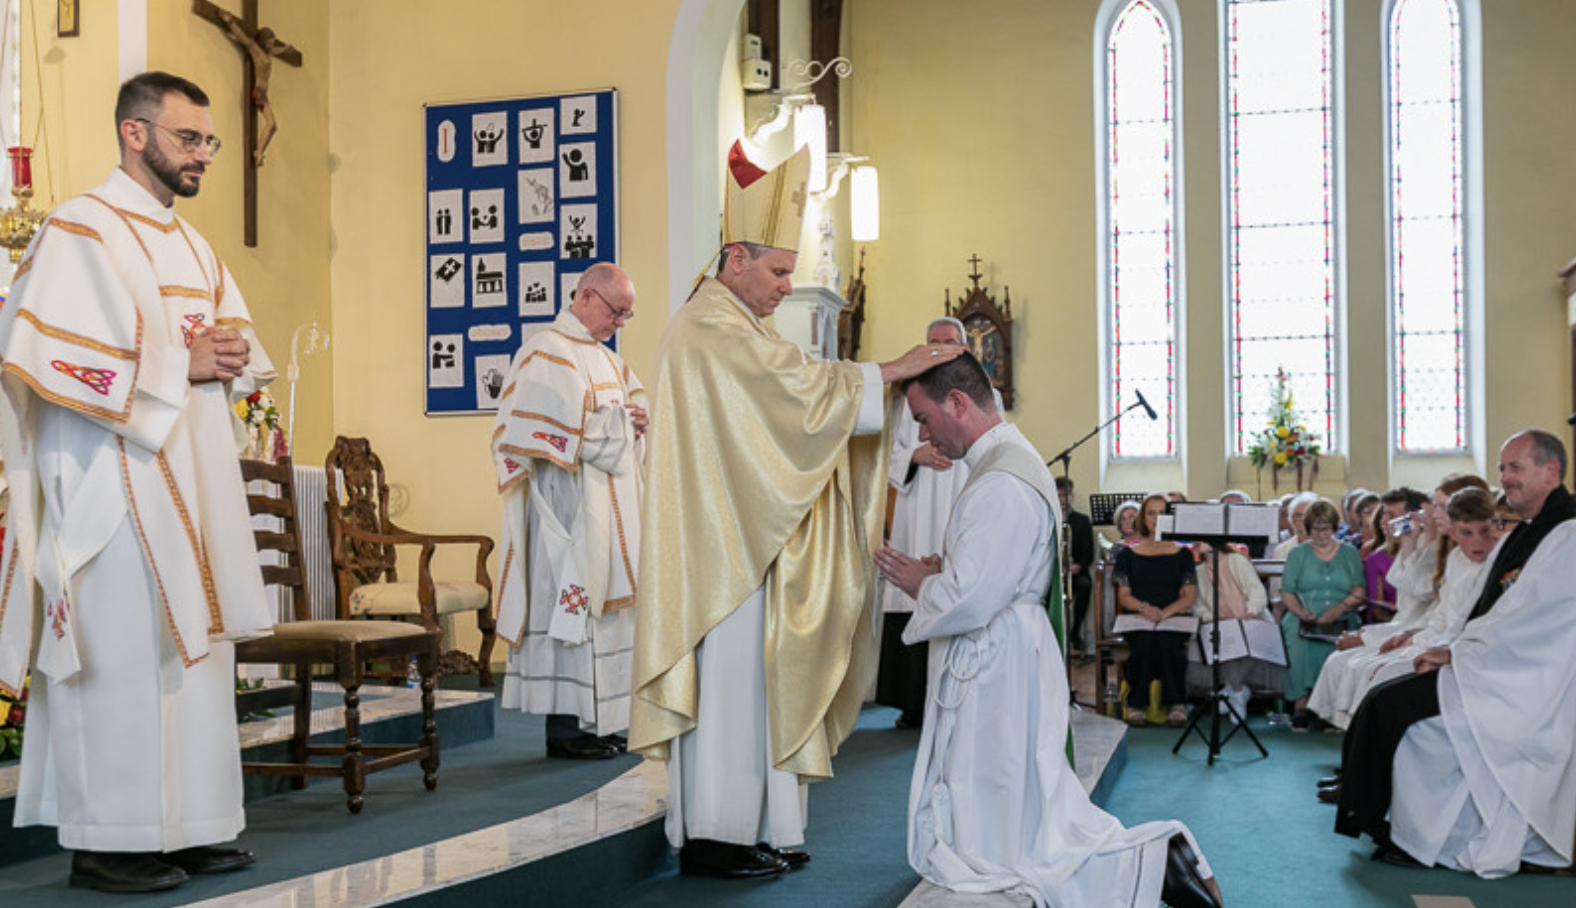 priest being ordained at a church, surrounded by other priests